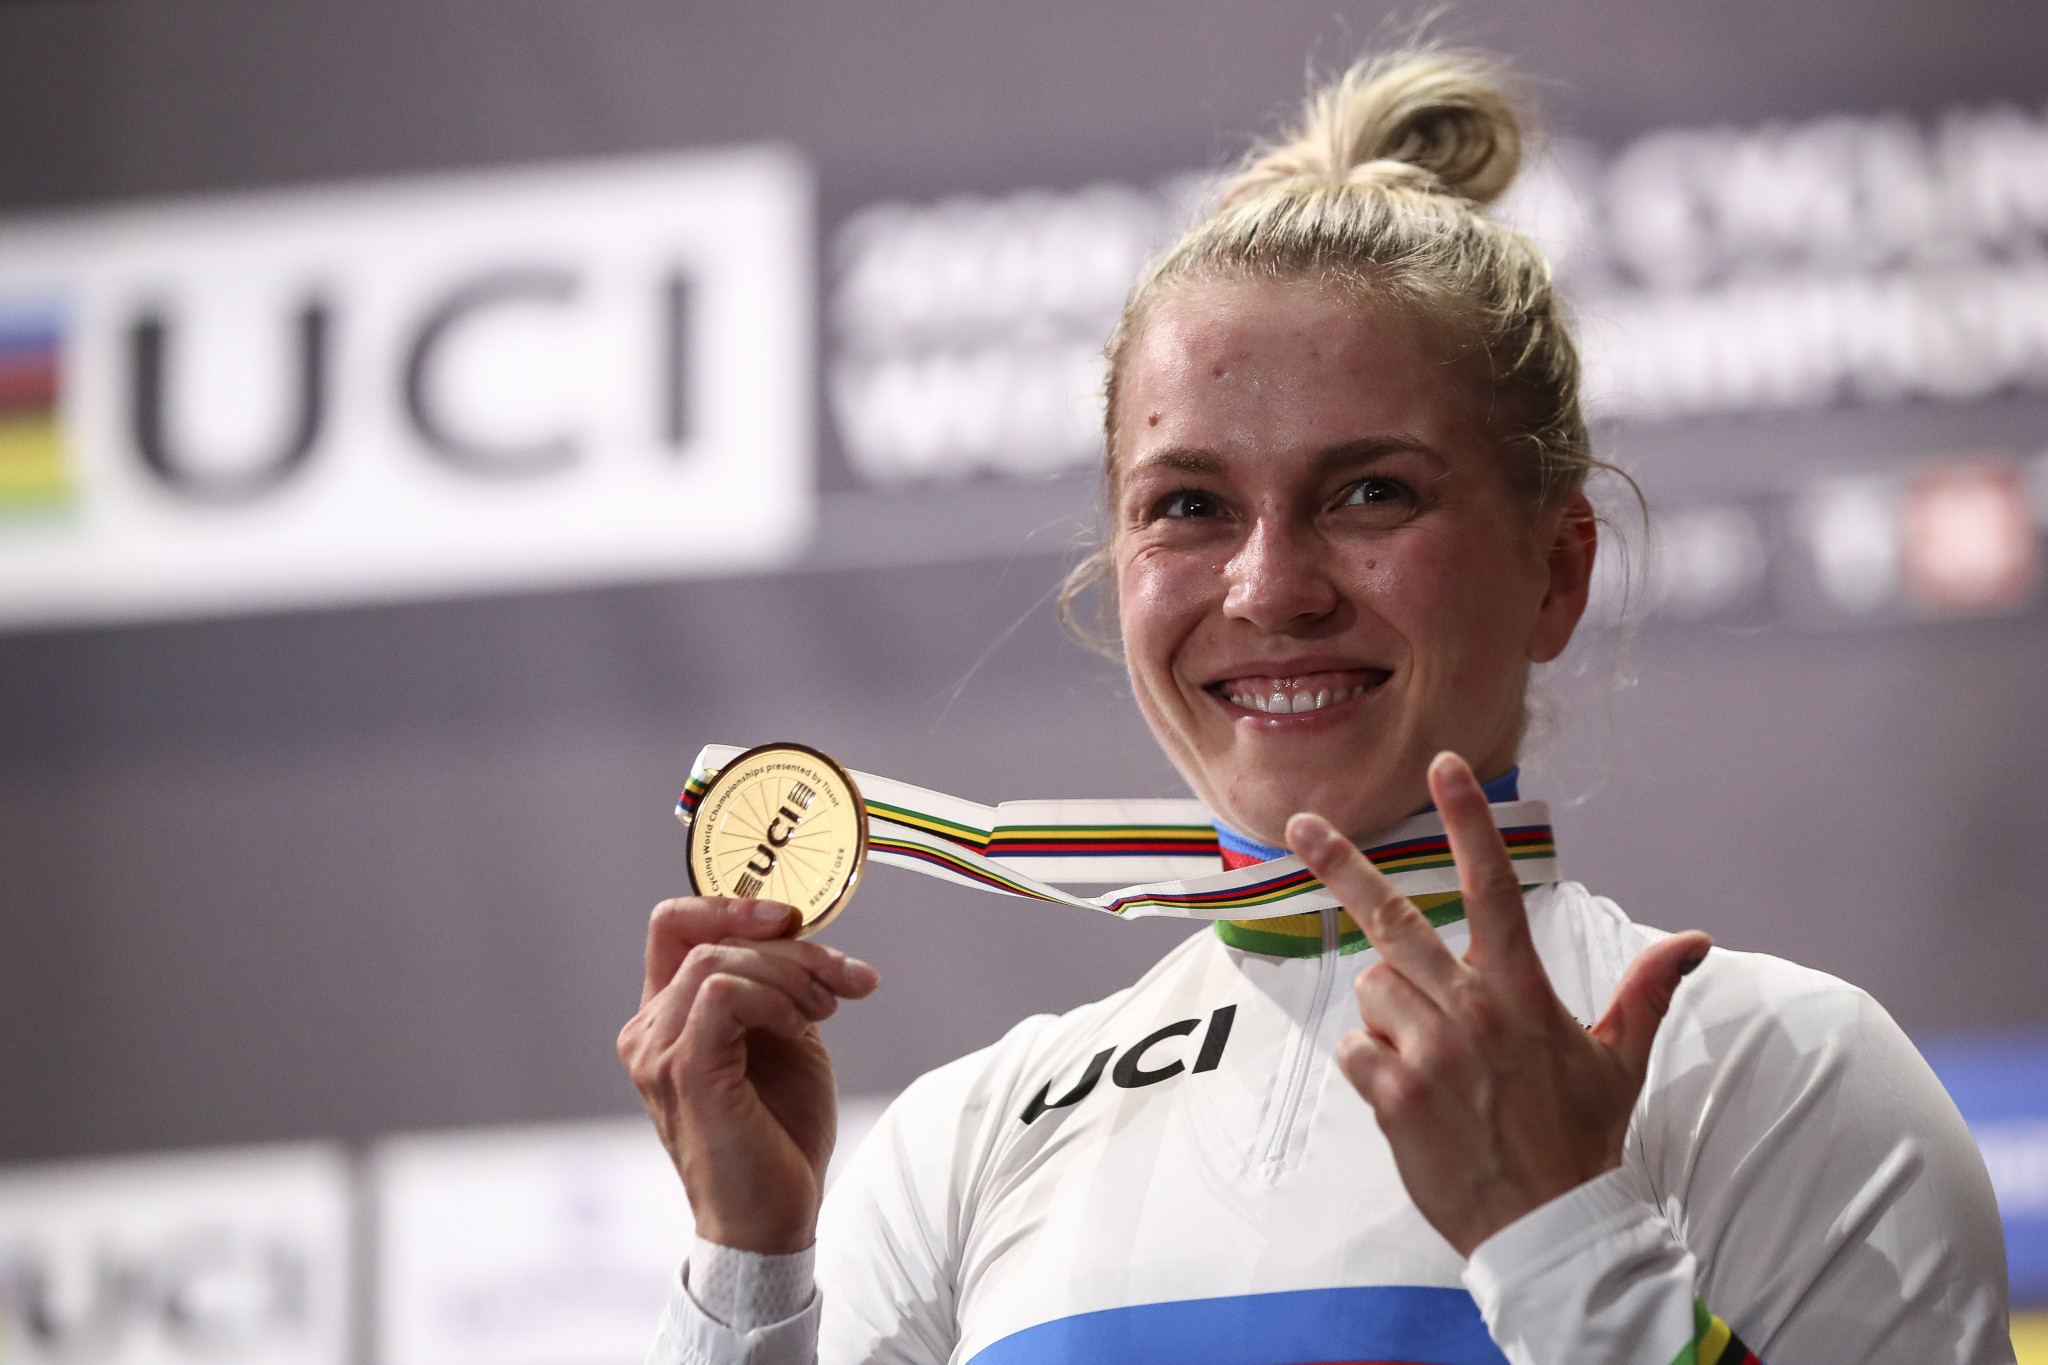 Hinze earns third gold medal as World Track Cycling Championships conclude